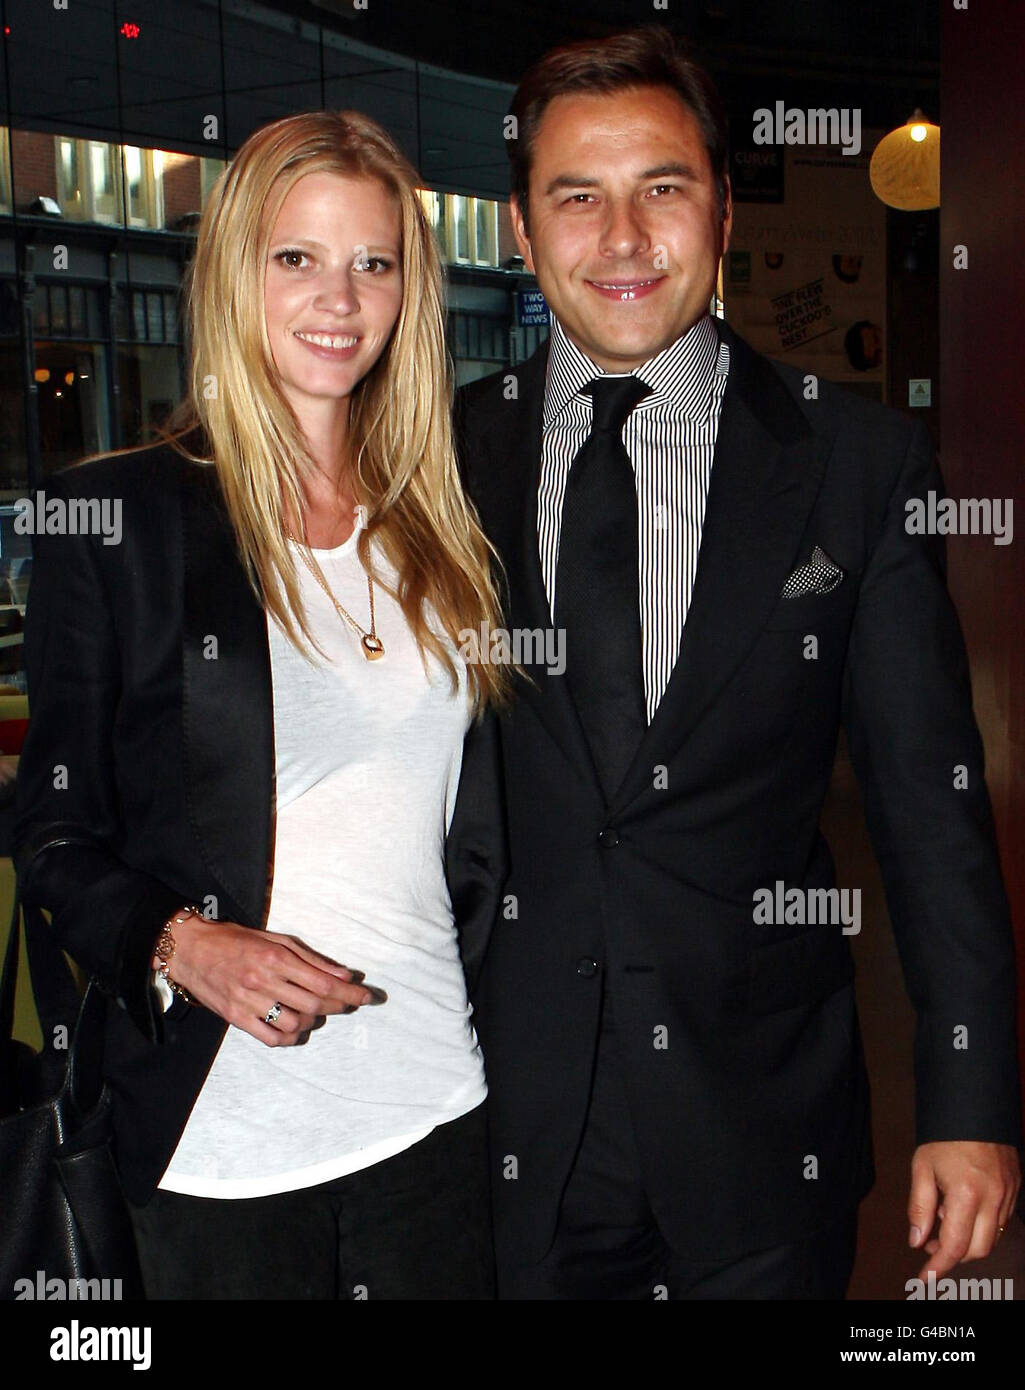 David Walliams and his wife Lara Stone arrive for a performance of 'Mr Stink' at the Curve Theatre, Leicester this evening. Stock Photo